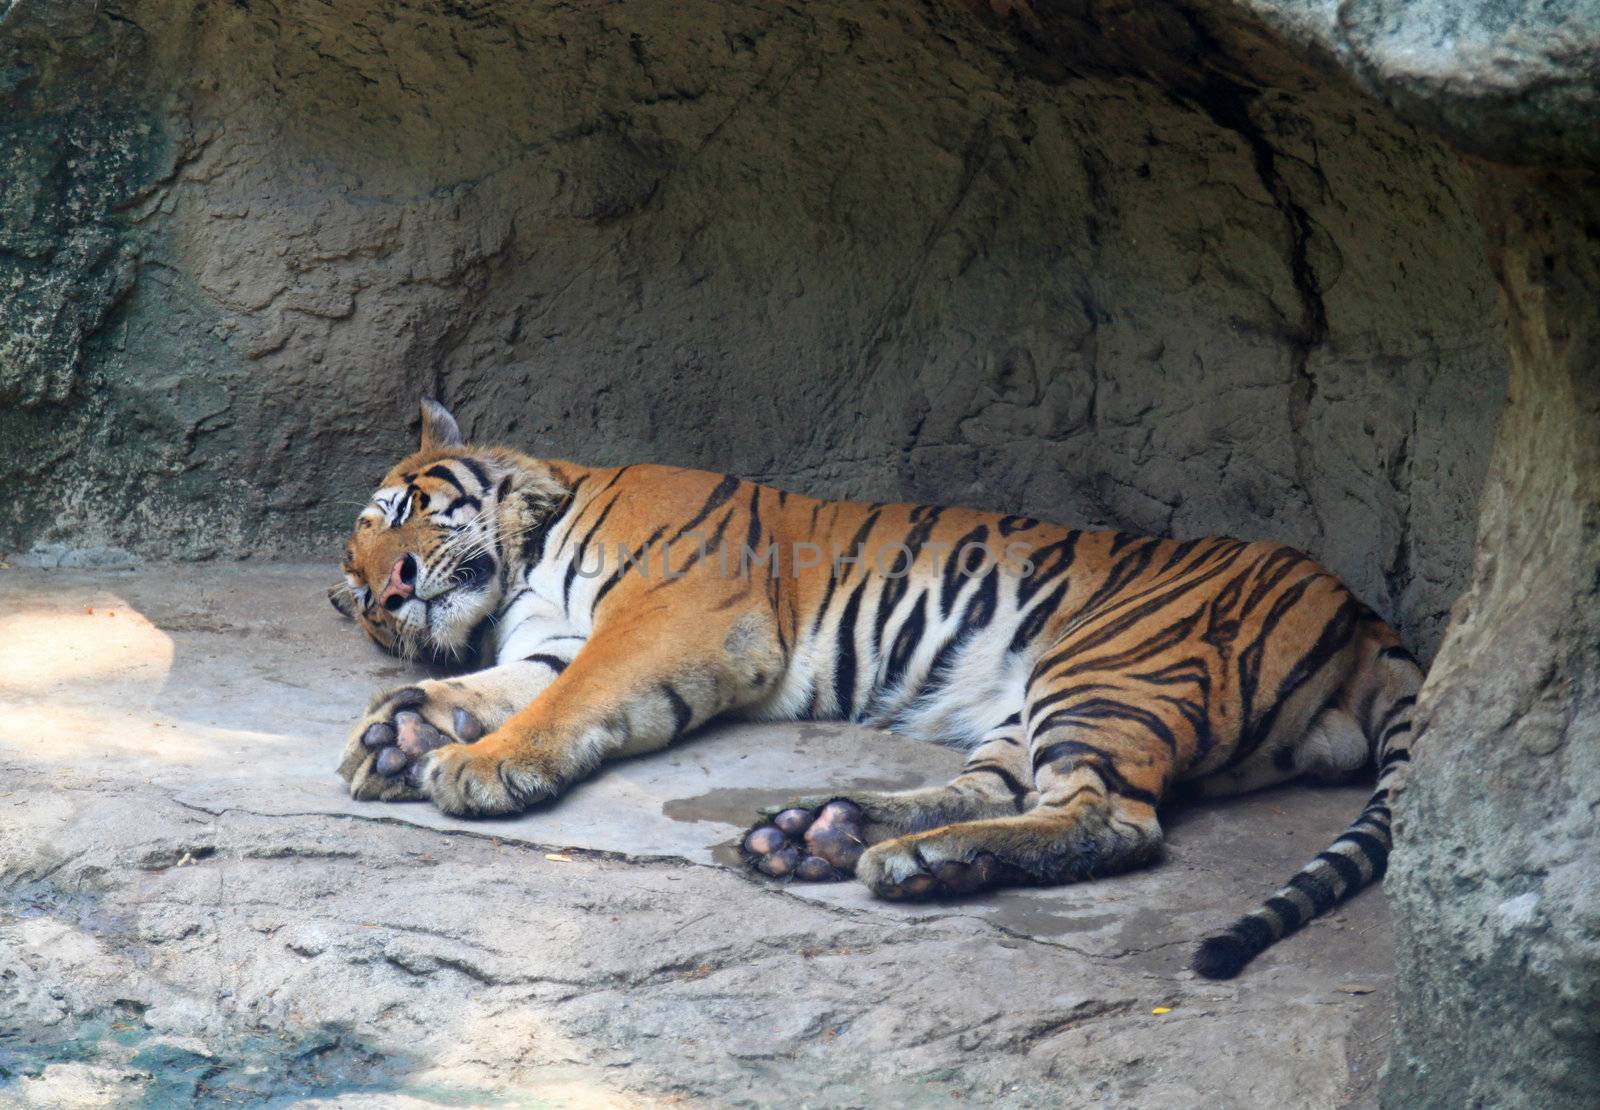 Tiger sleep on a rock in zoo  by nuchylee